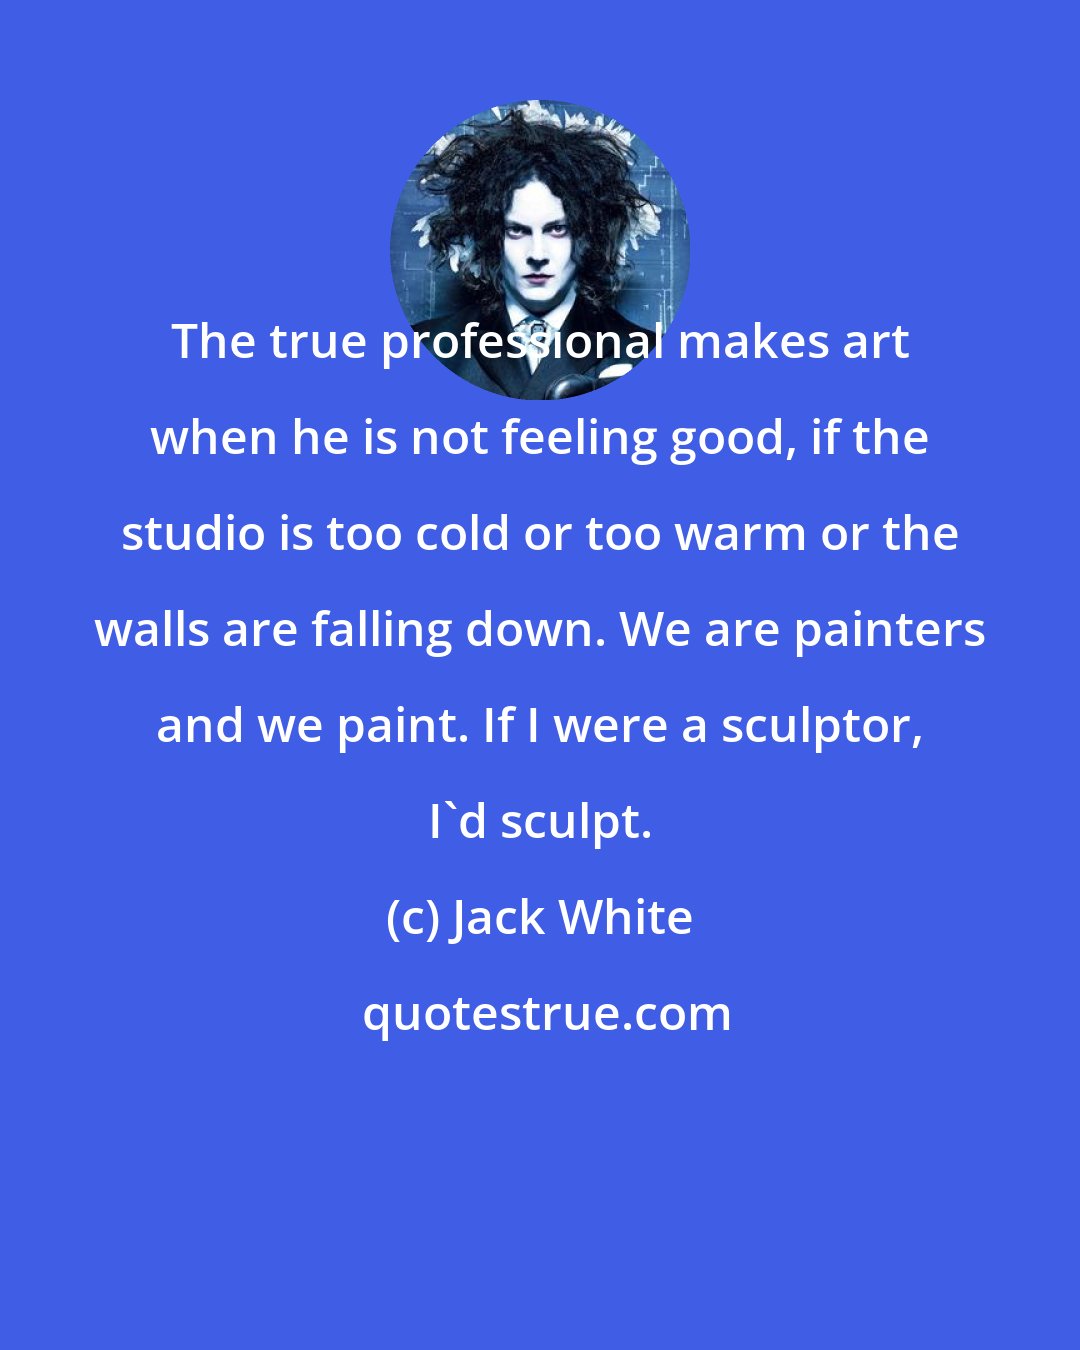 Jack White: The true professional makes art when he is not feeling good, if the studio is too cold or too warm or the walls are falling down. We are painters and we paint. If I were a sculptor, I'd sculpt.